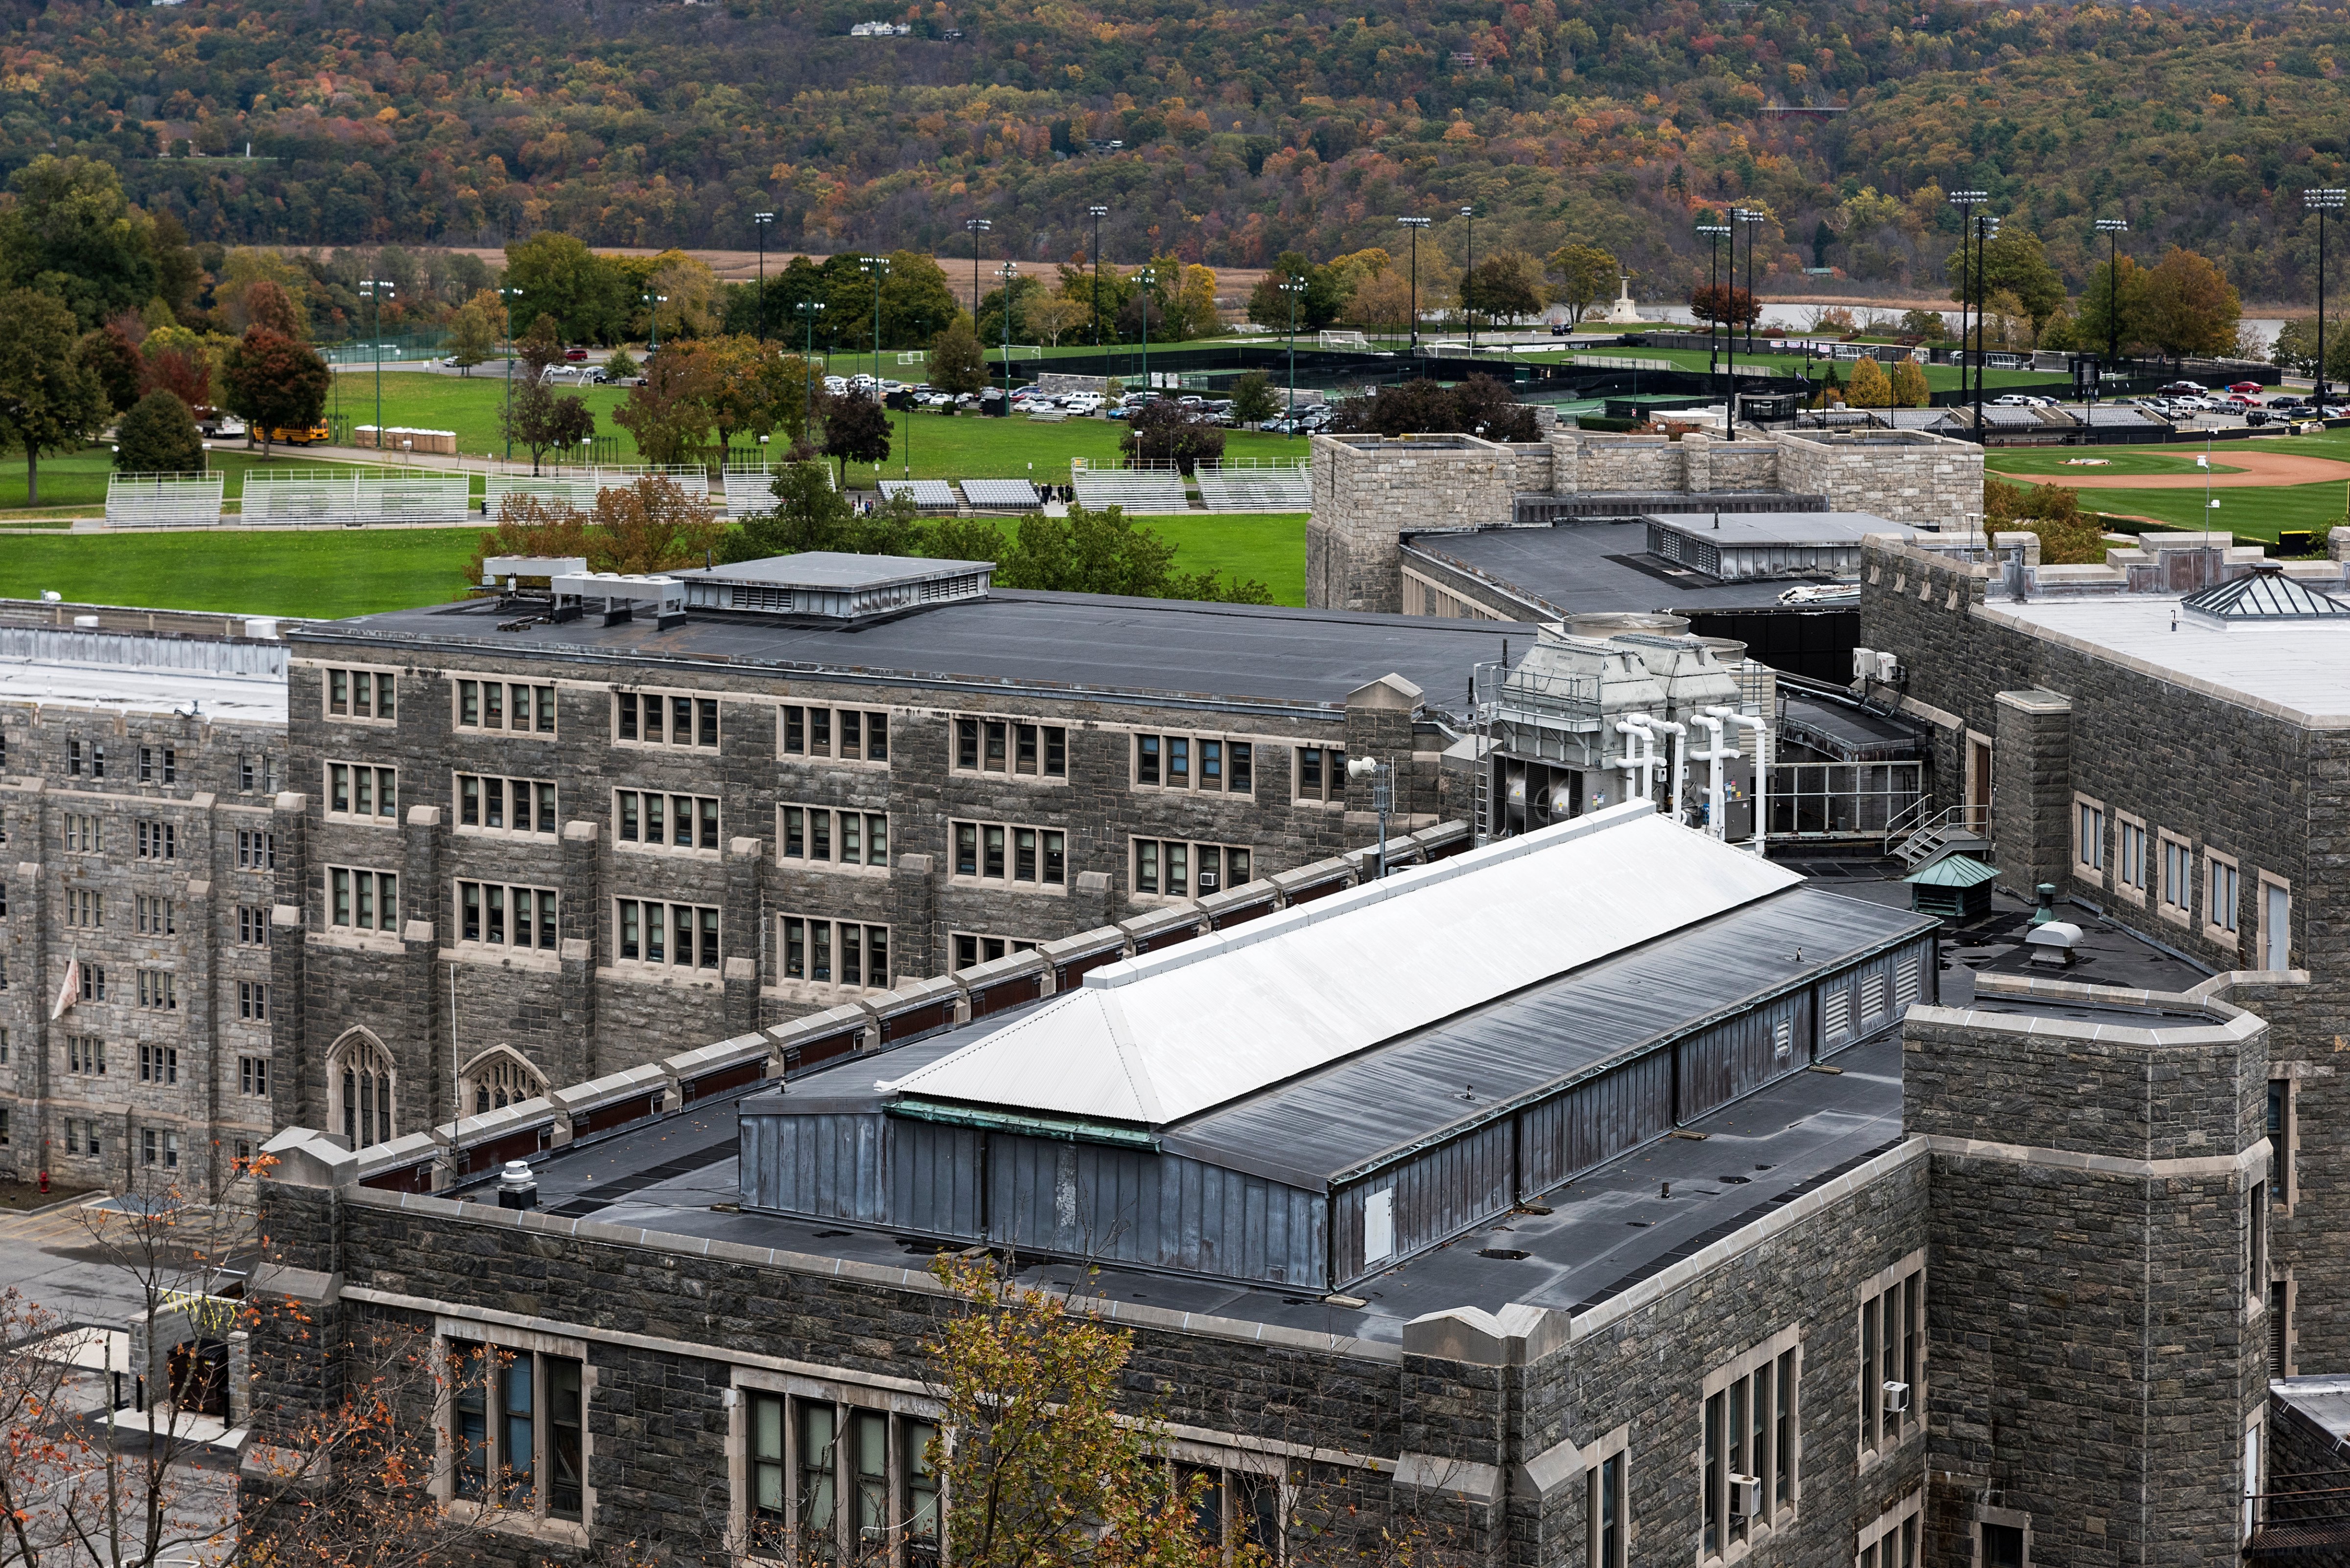 The West Point Military Academy campus. (John Greim—Getty Images)